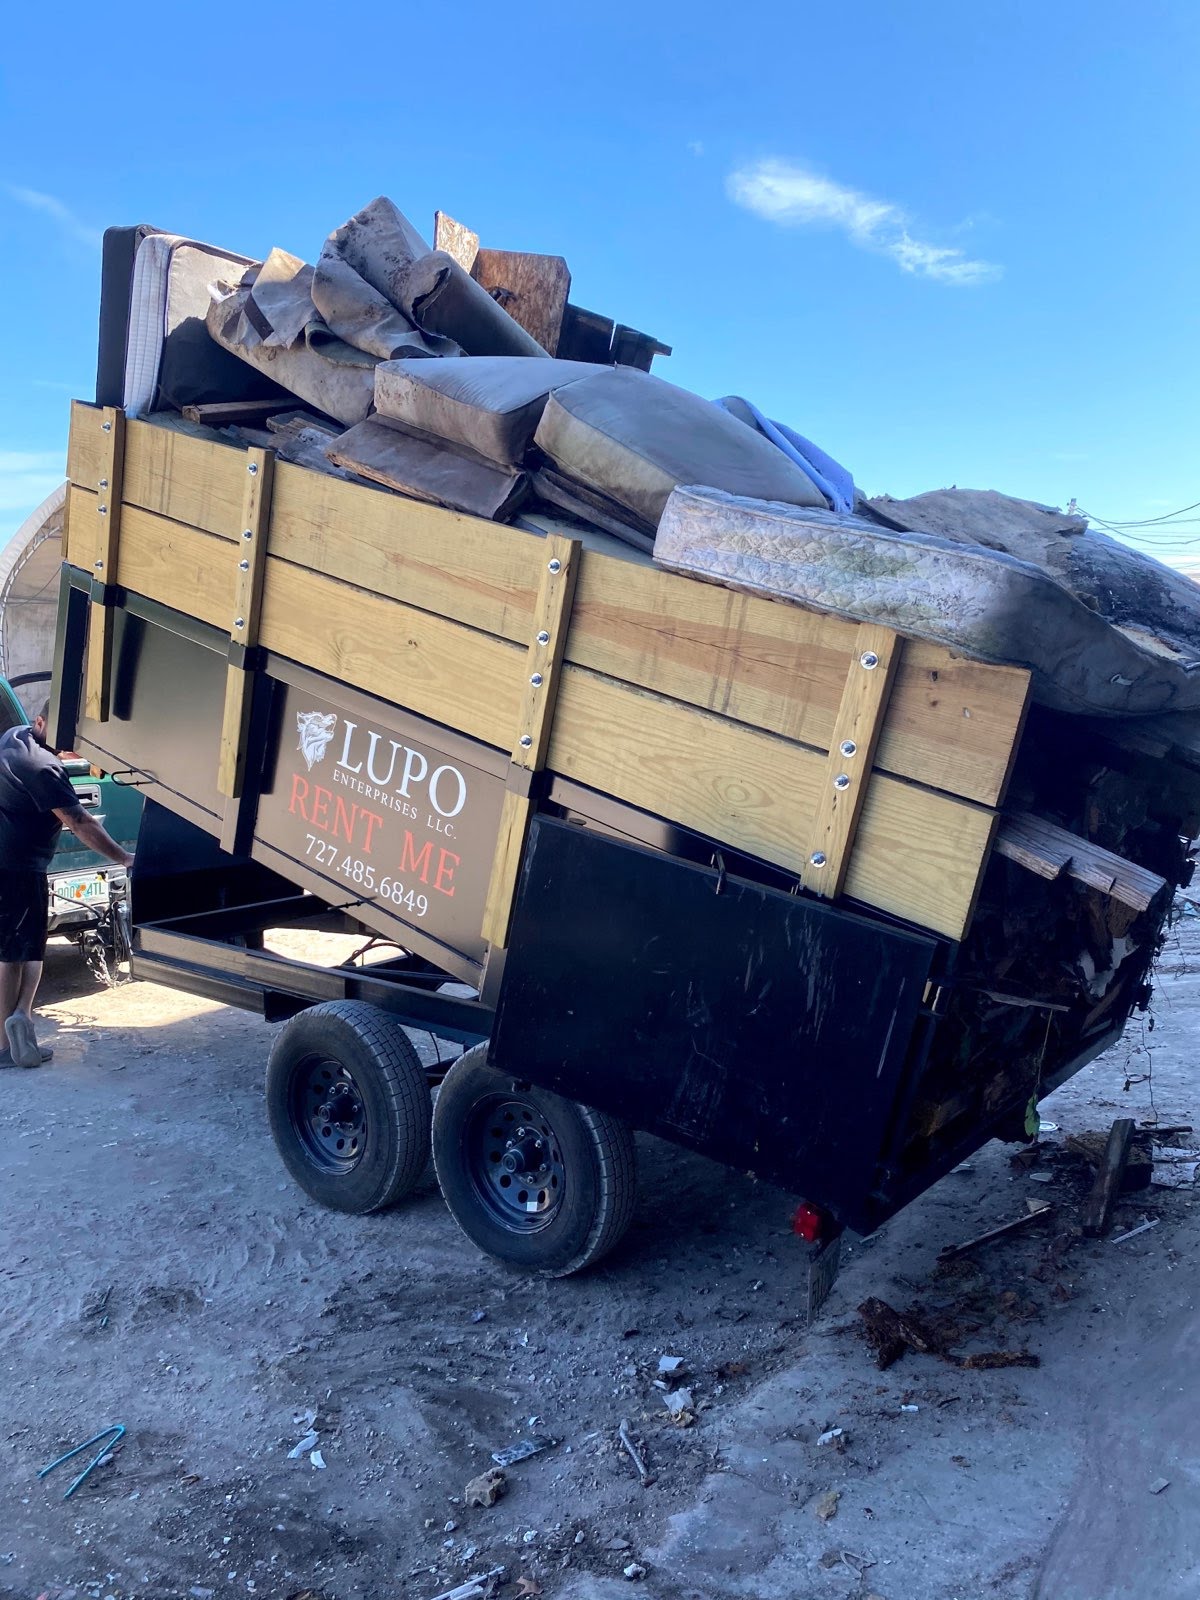 Lupo Dumpster Rentals and Junk Removal 5647 Andrea Dr, Holiday Florida 34690